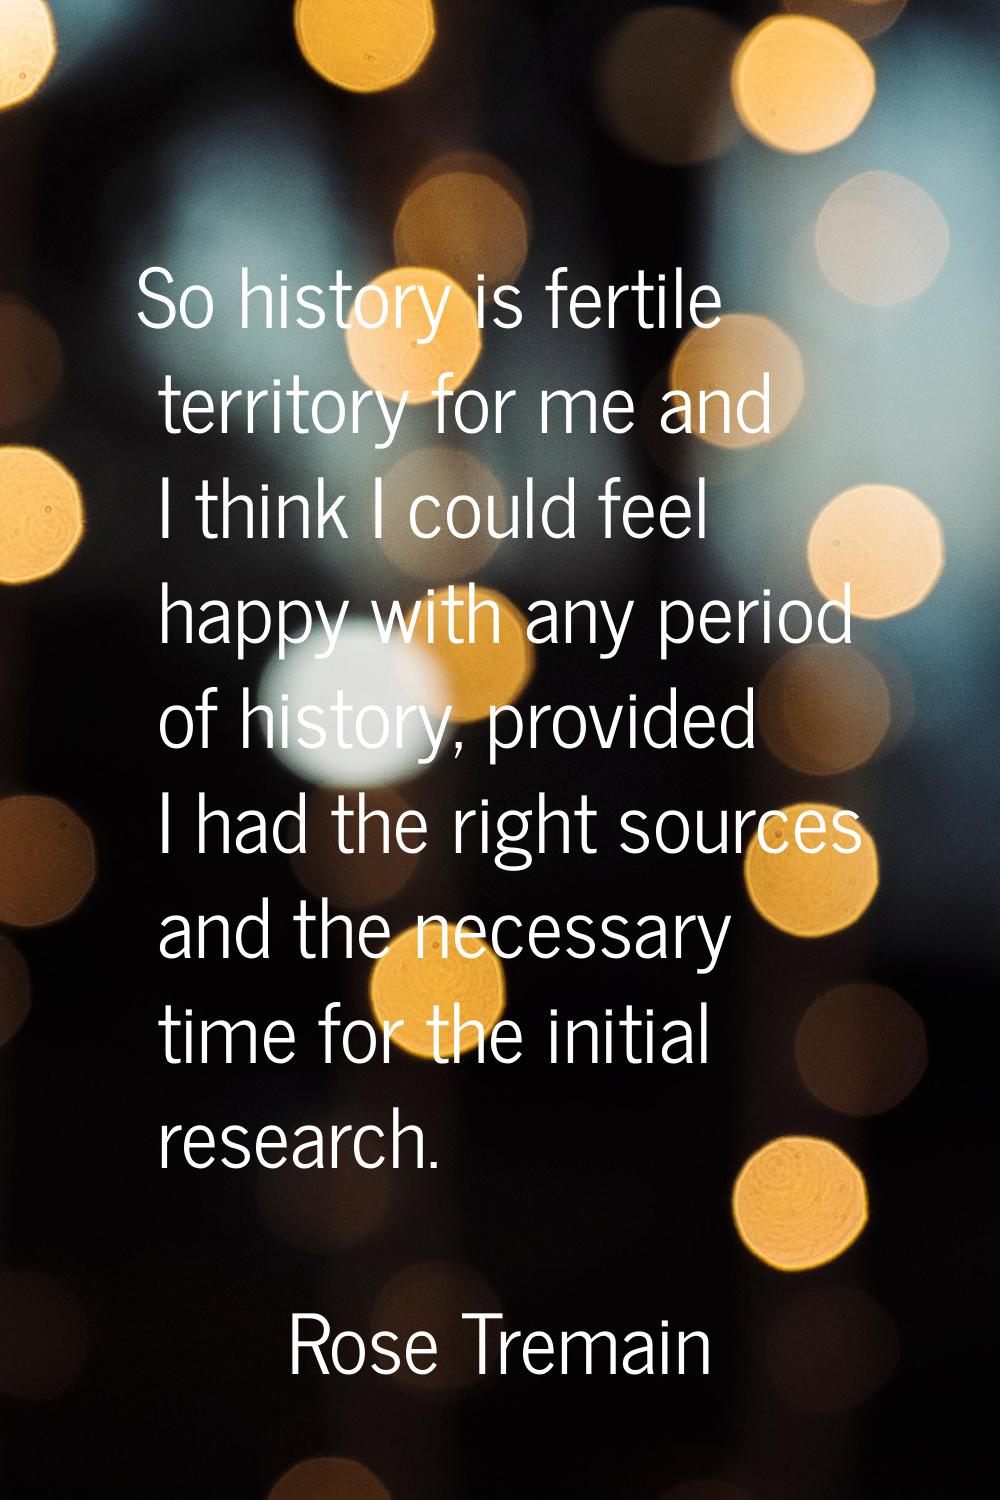 So history is fertile territory for me and I think I could feel happy with any period of history, p